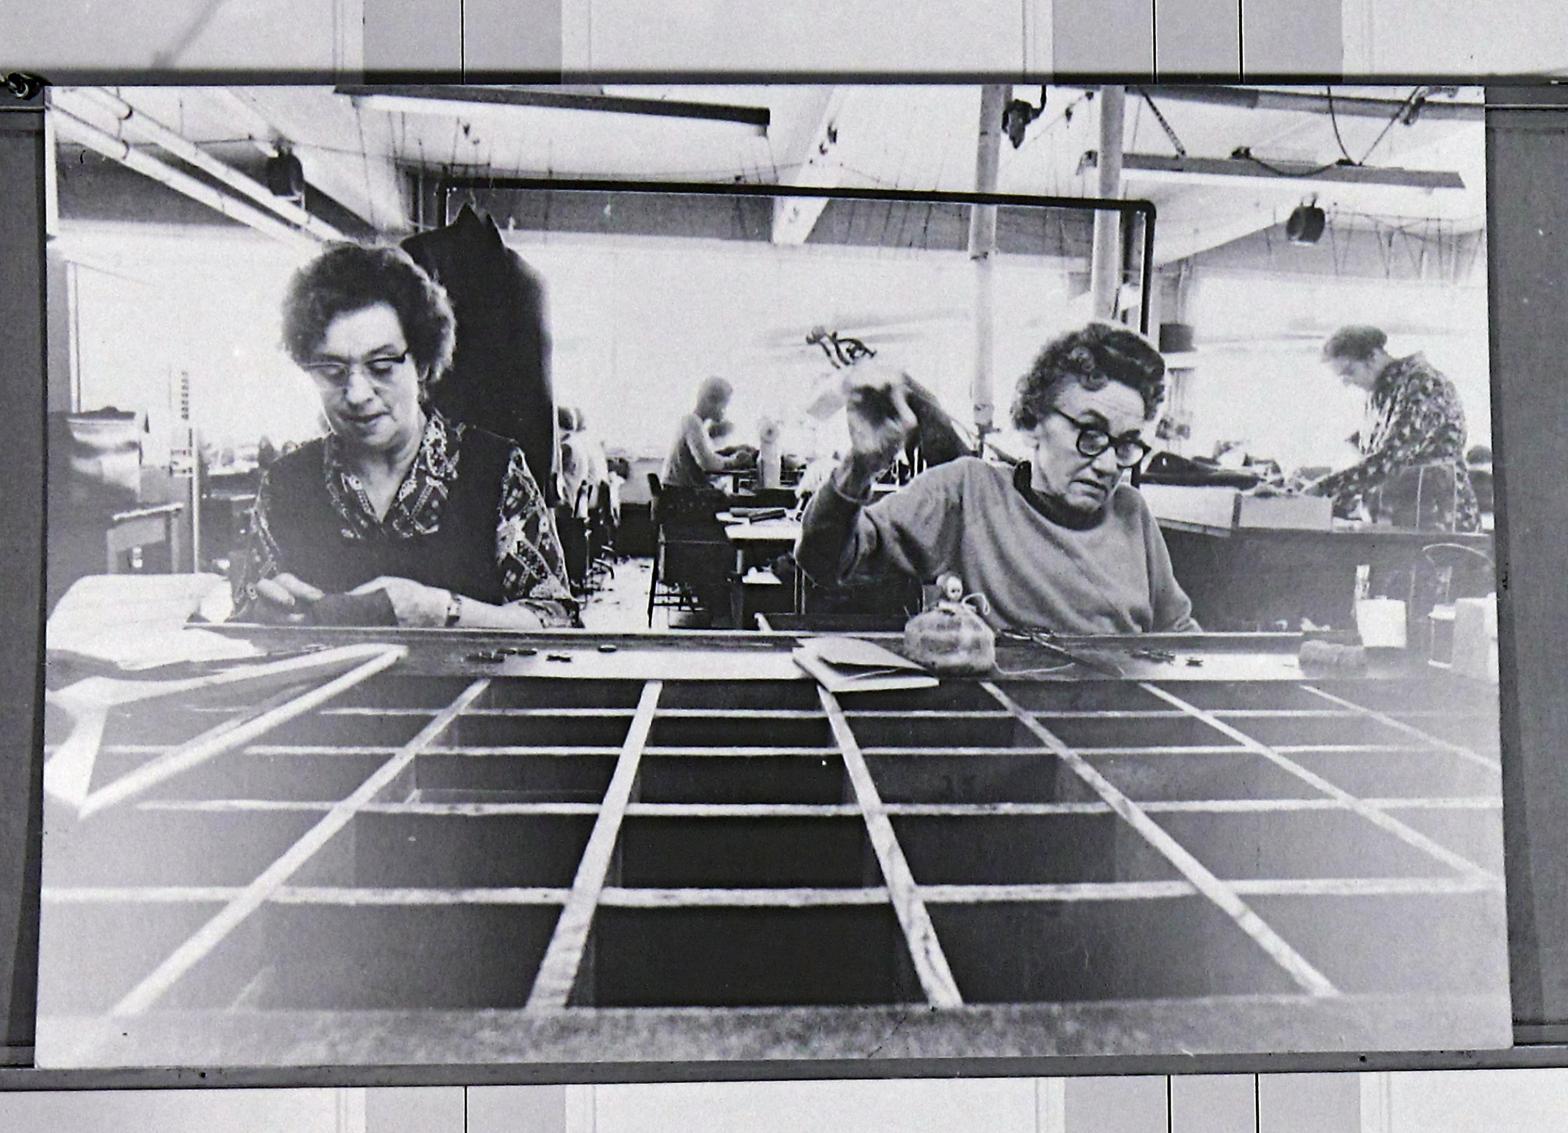 Panel from ‘Women and Work’ 1975 shows two women working in a textile factory.